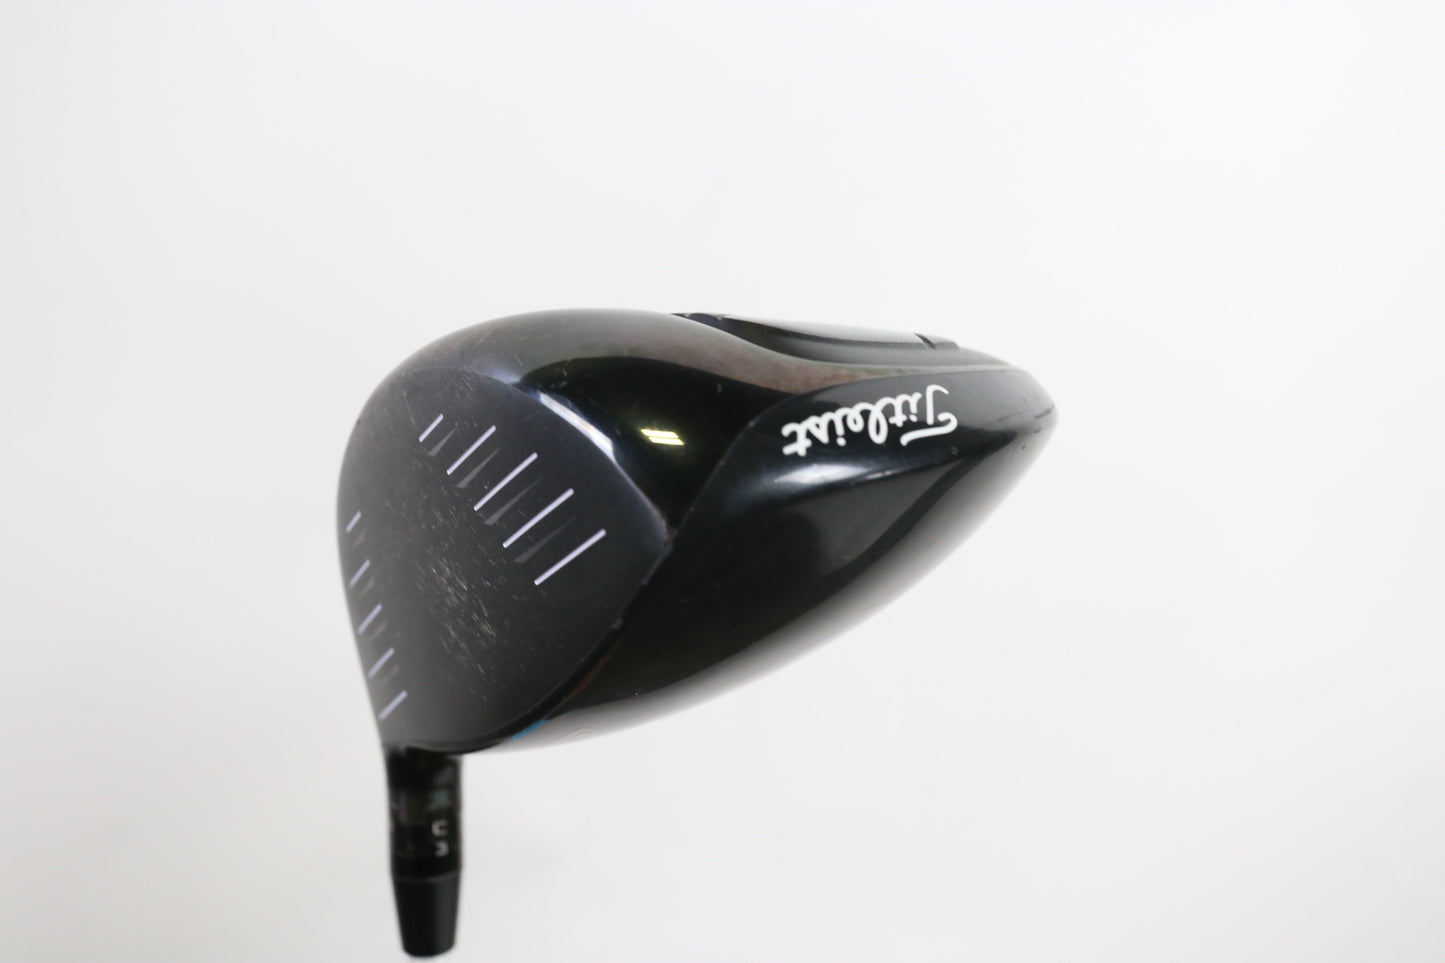 Used Titleist 915D3 Driver - Right-Handed - 10.5 Degrees - Stiff Flex